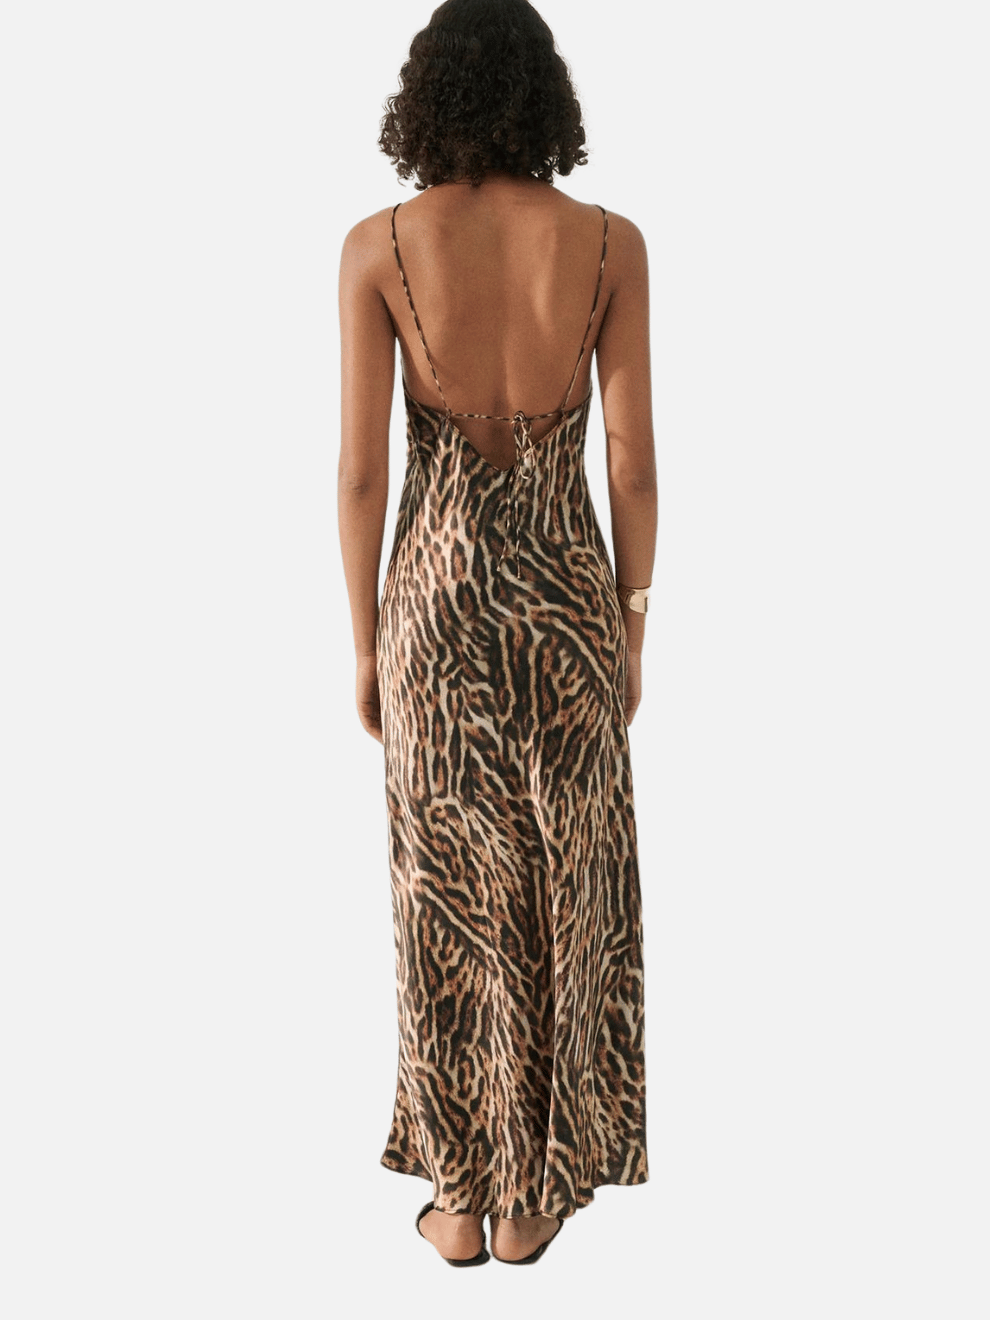 Deco Ruched Dress in Rouleau Leopard